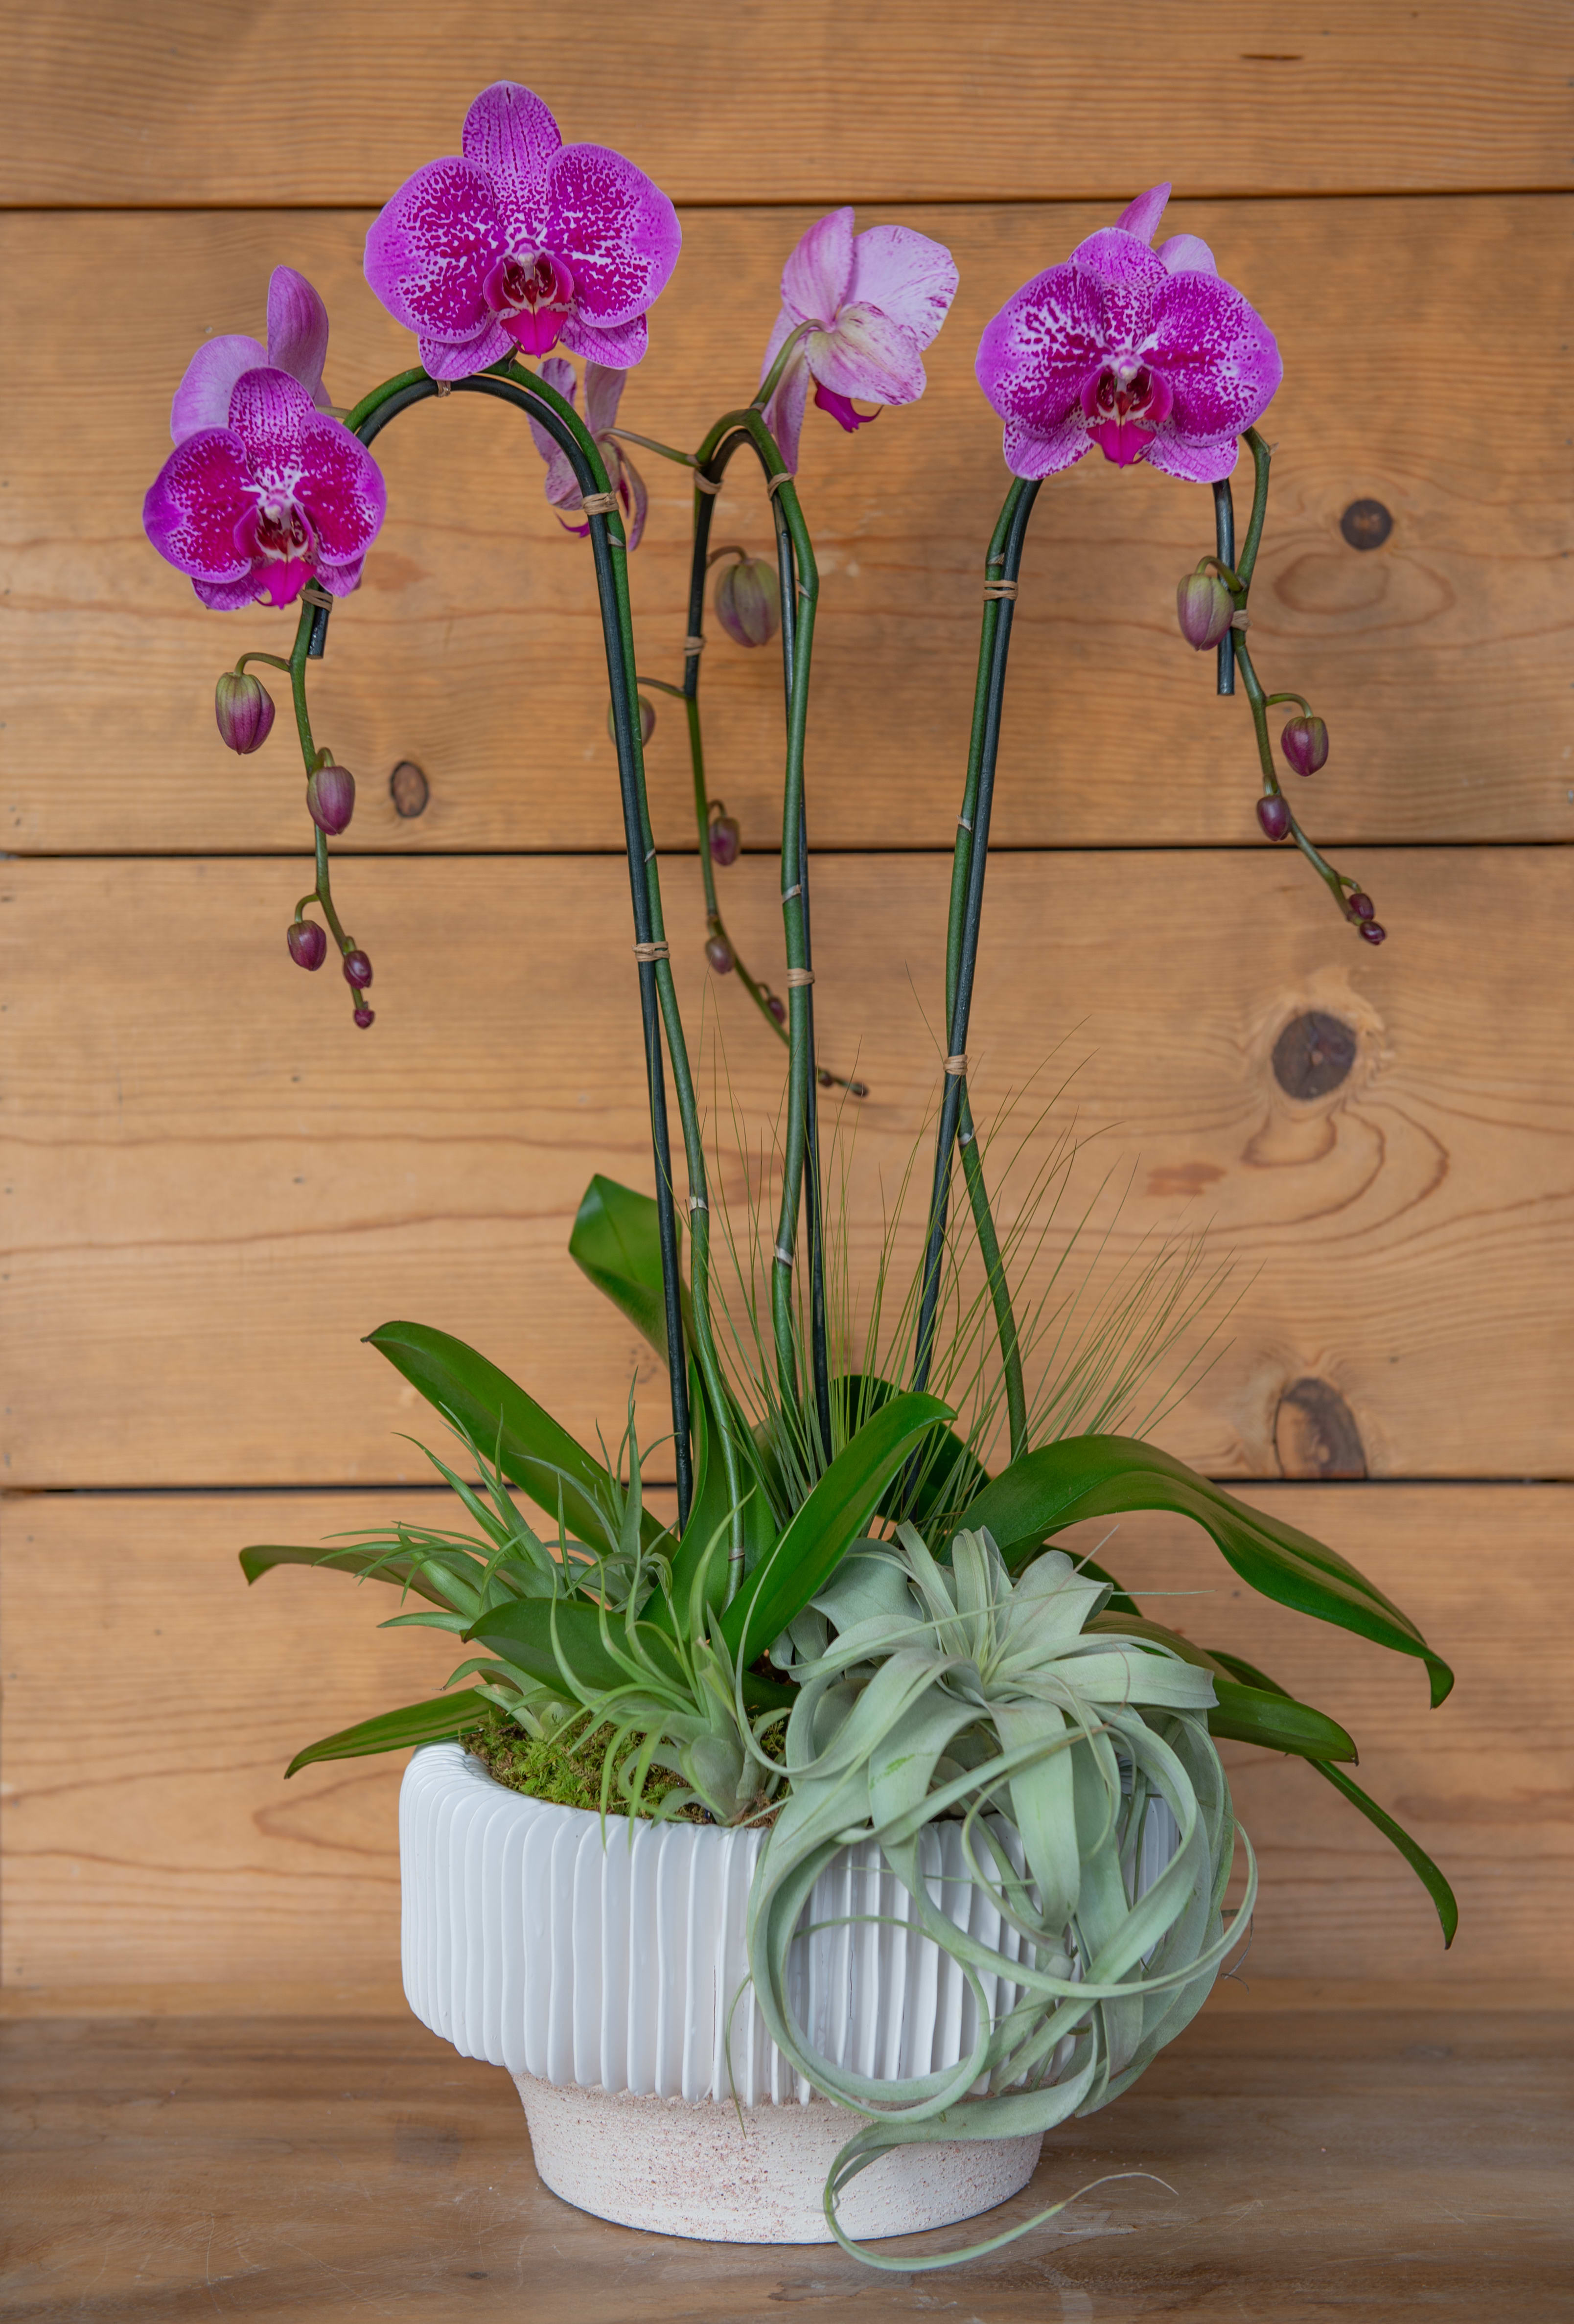 Orchid Oasis - Let our designer create a unique orchid oasis just for you. This design comes with three phaleanopsis orchid plants and a stunning large air plant. Orchid color may vary to guarantee freshness and beauty vase will vary to offer a unique curated design.